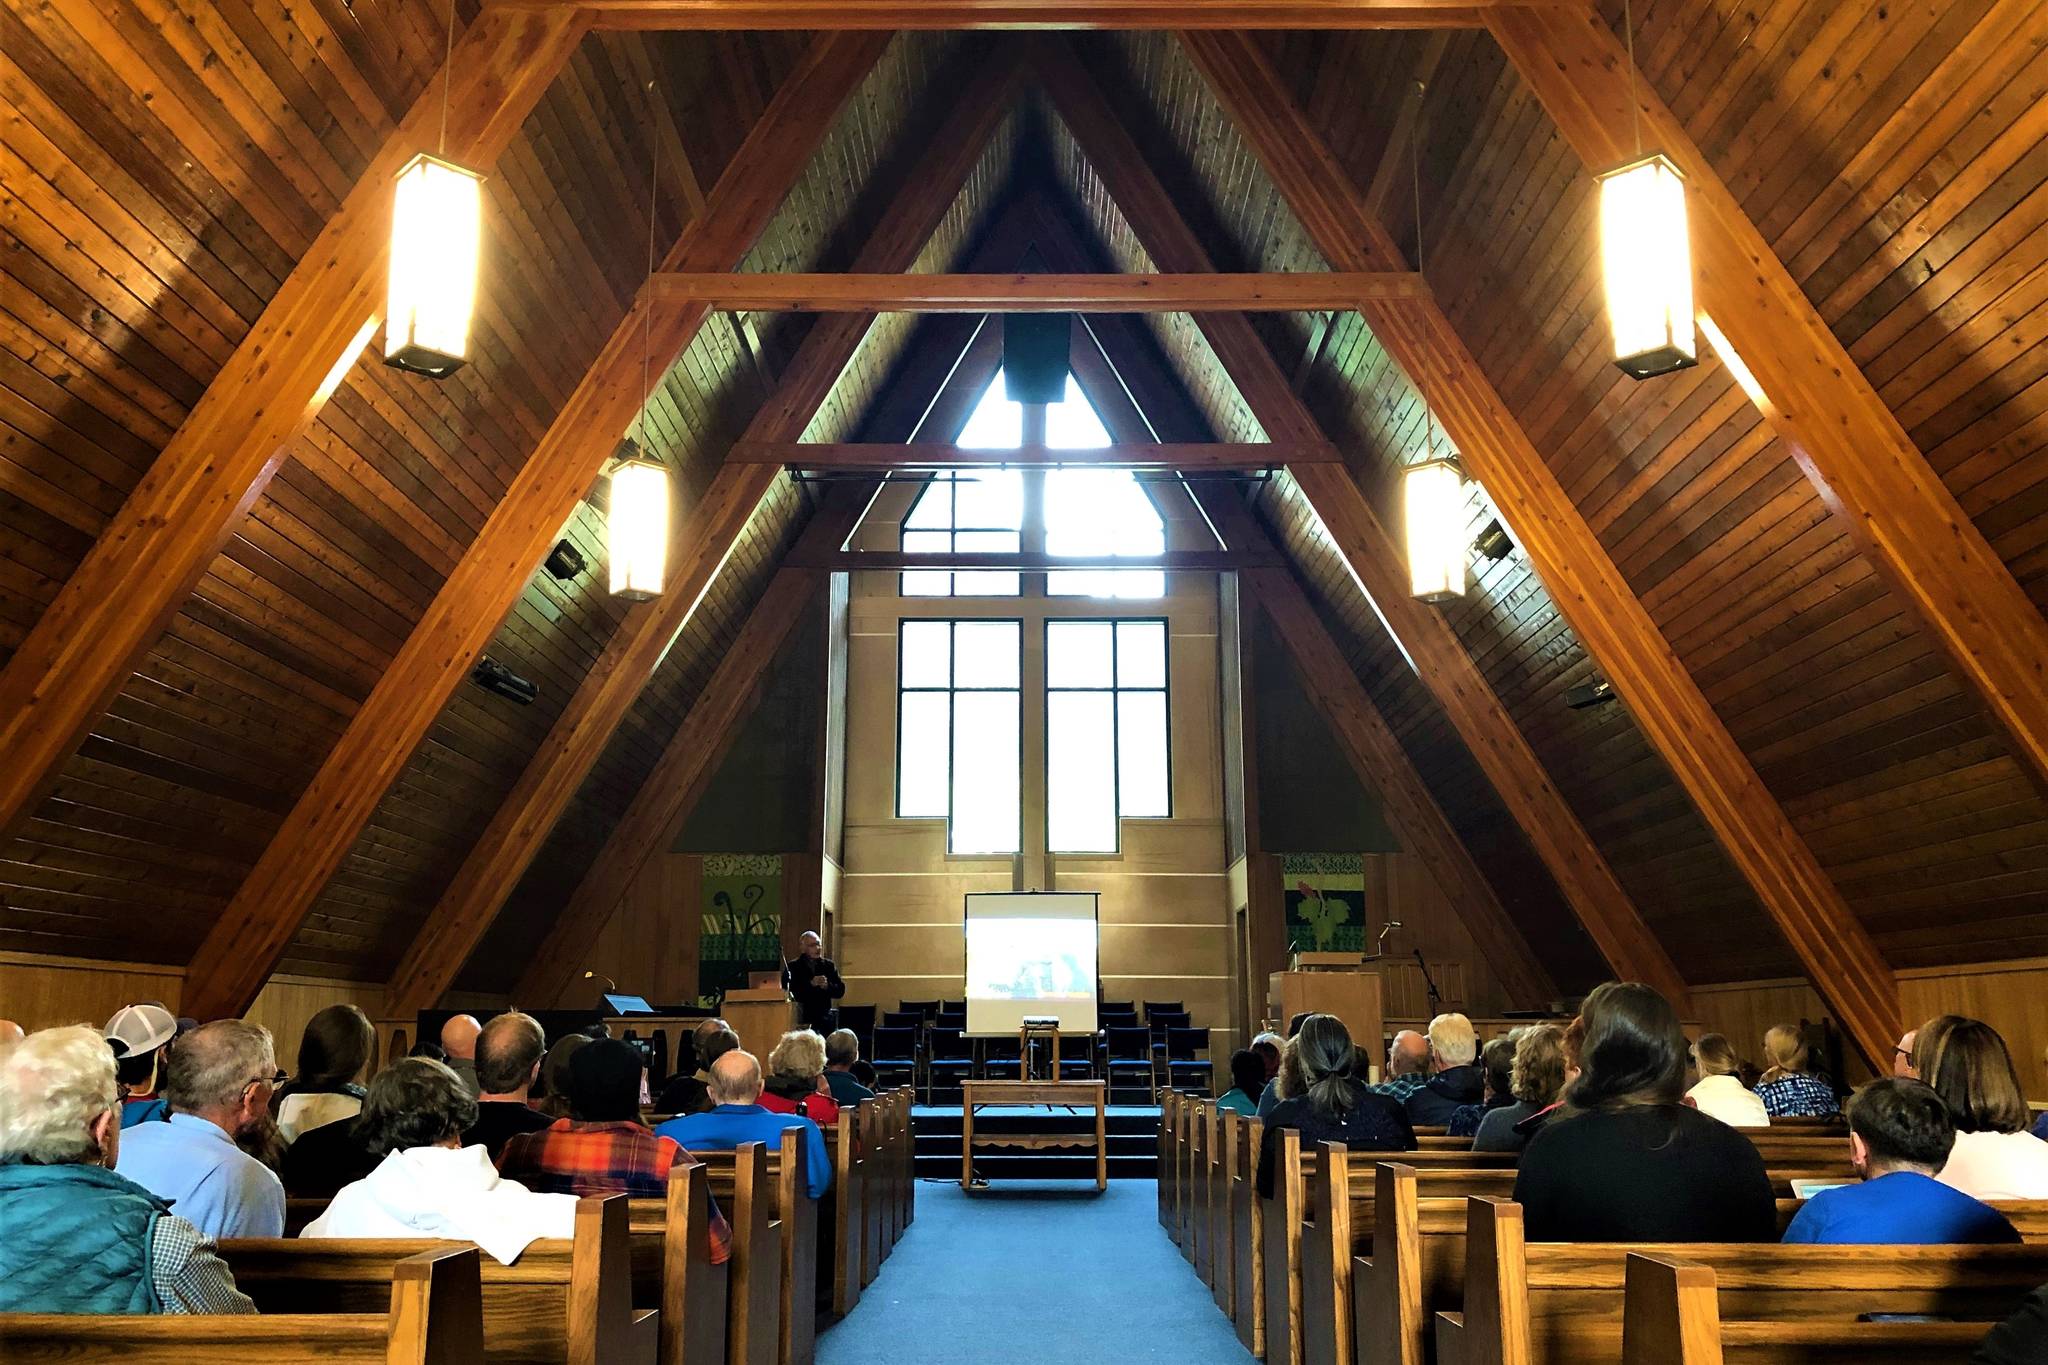 Rev. Charles Bower speaks at Northern Light United Church in Juneau during the “Climate Change Through the Eyes of Alaska Natives,” forum on Sept. 12, 2019. (Peter Segall | Juneau Empire)